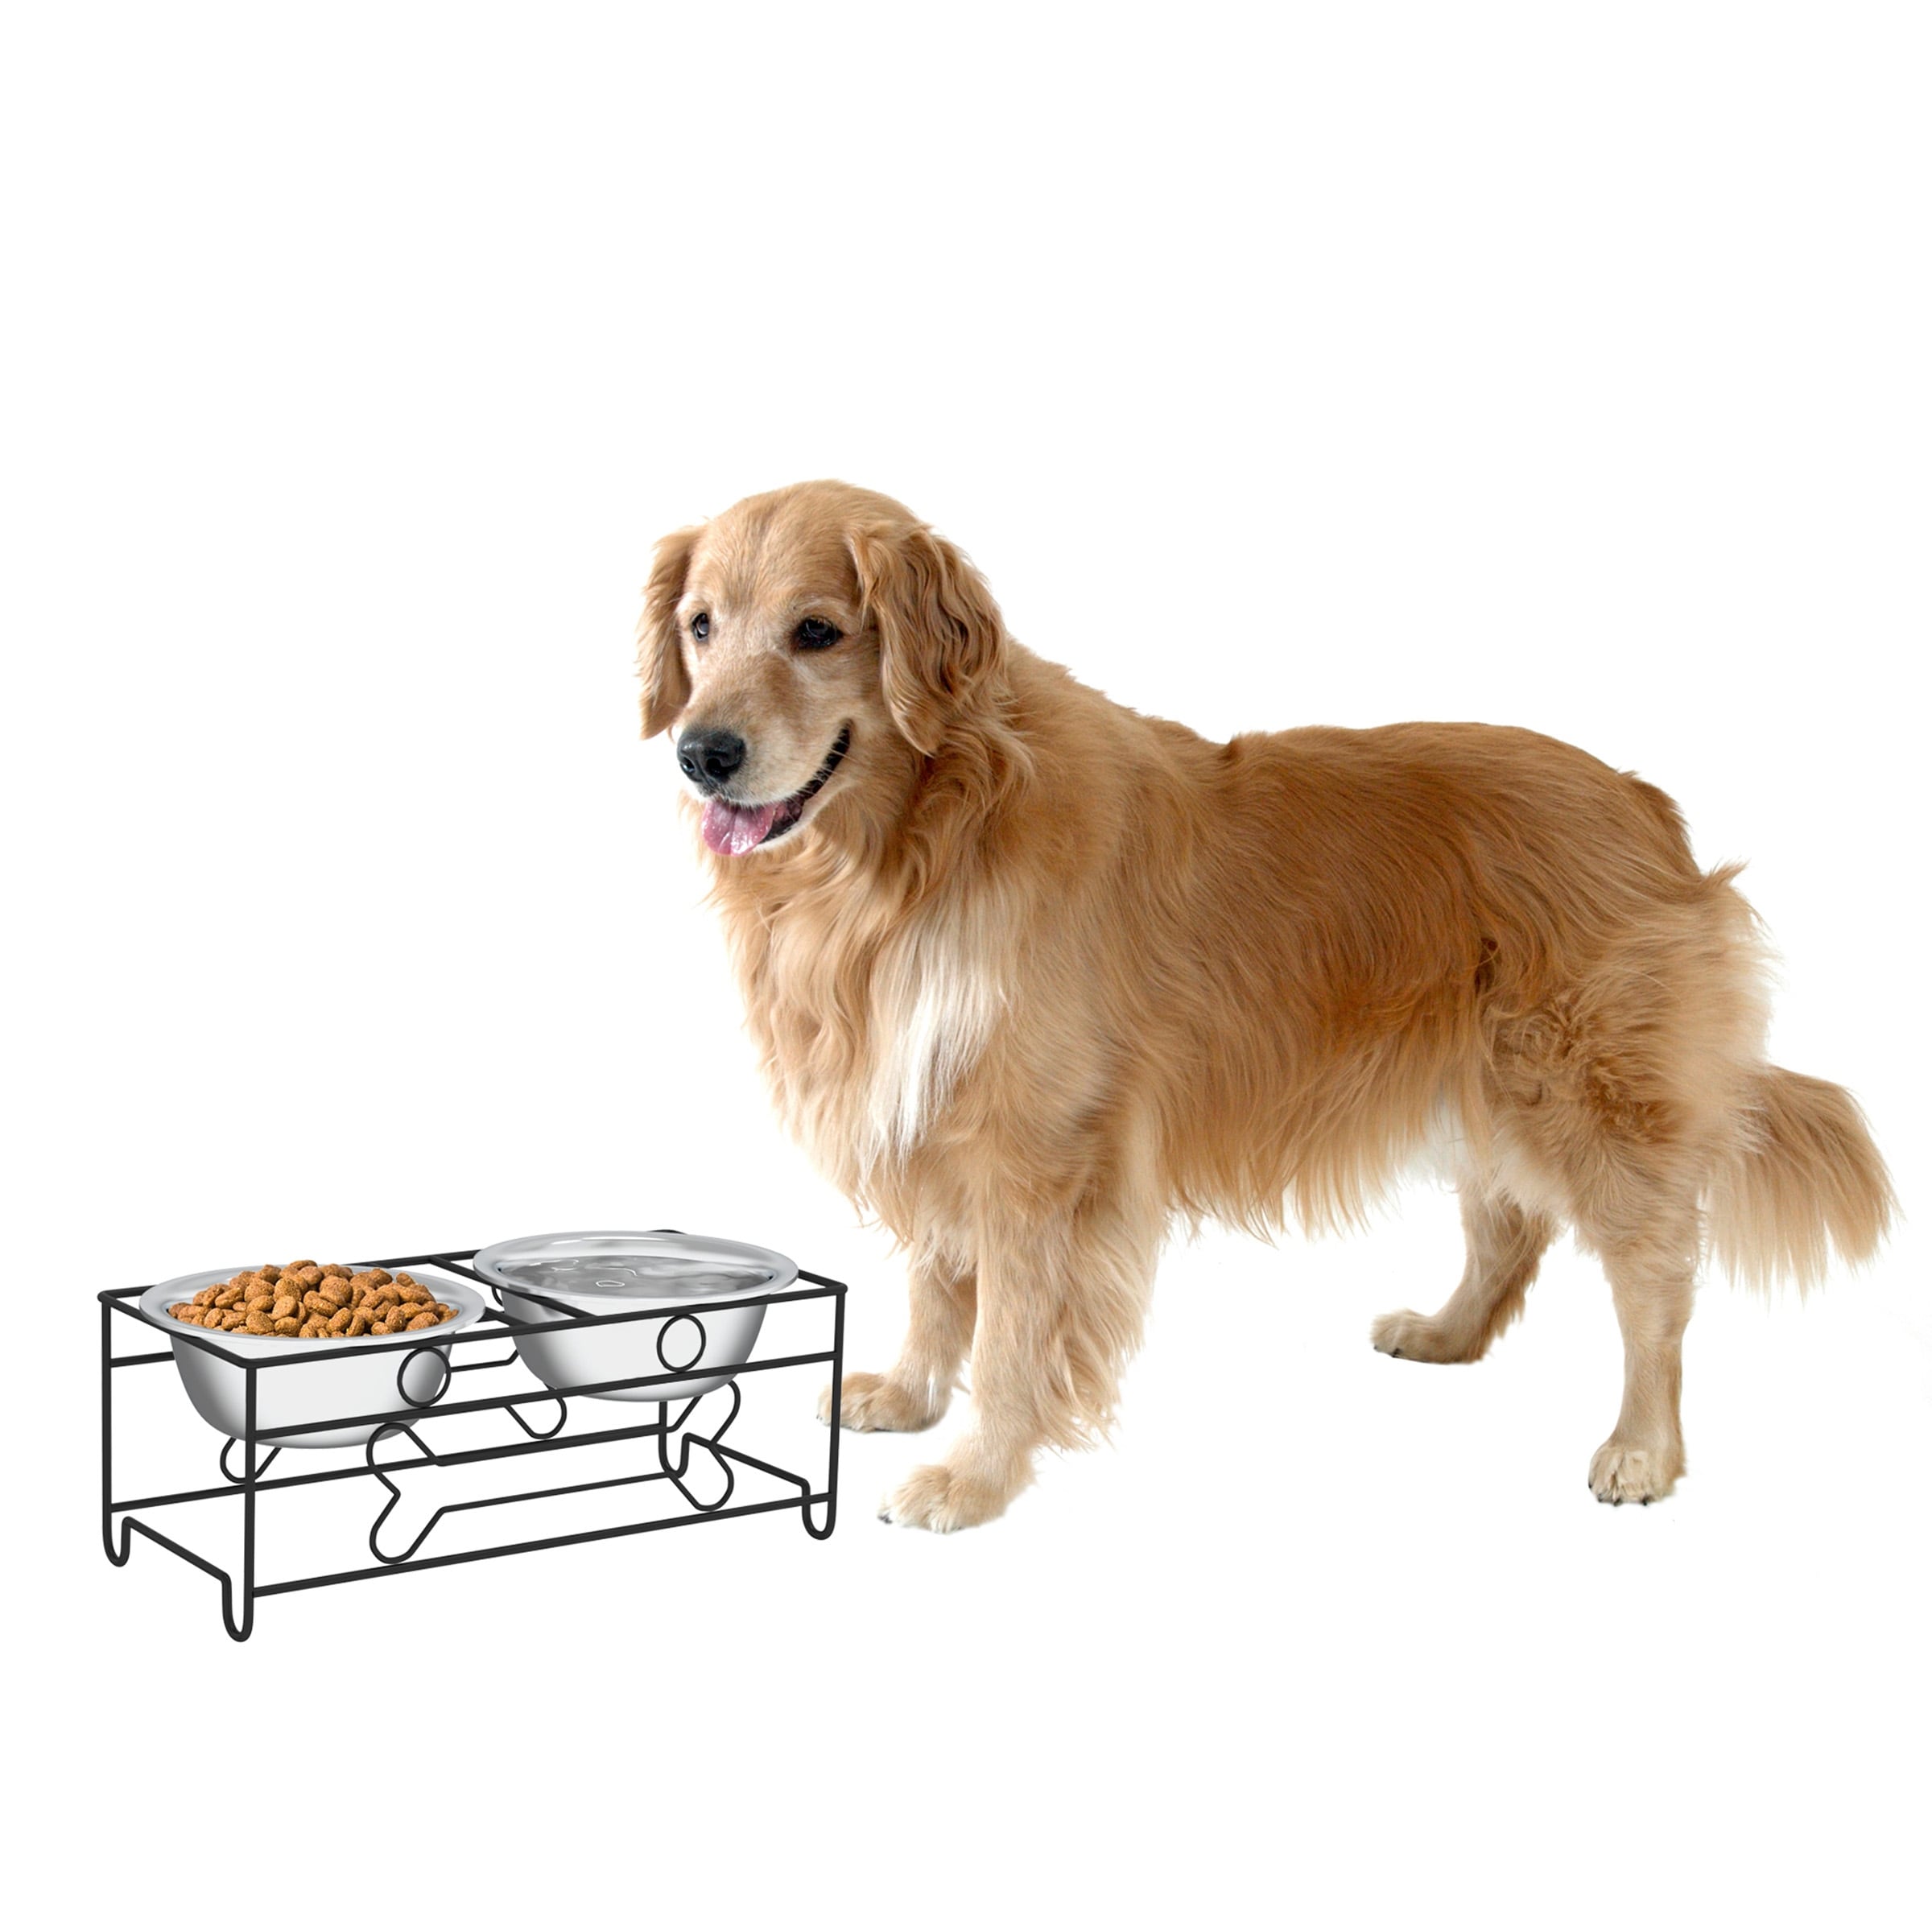 https://ak1.ostkcdn.com/images/products/is/images/direct/e8713c611f468d15c514f2a1c8a656043b0c0c23/PETMAKER-Elevated-Dog-Bowl-Stand-with-2-Stainless-Steel-40-Ounce-Bowls.jpg